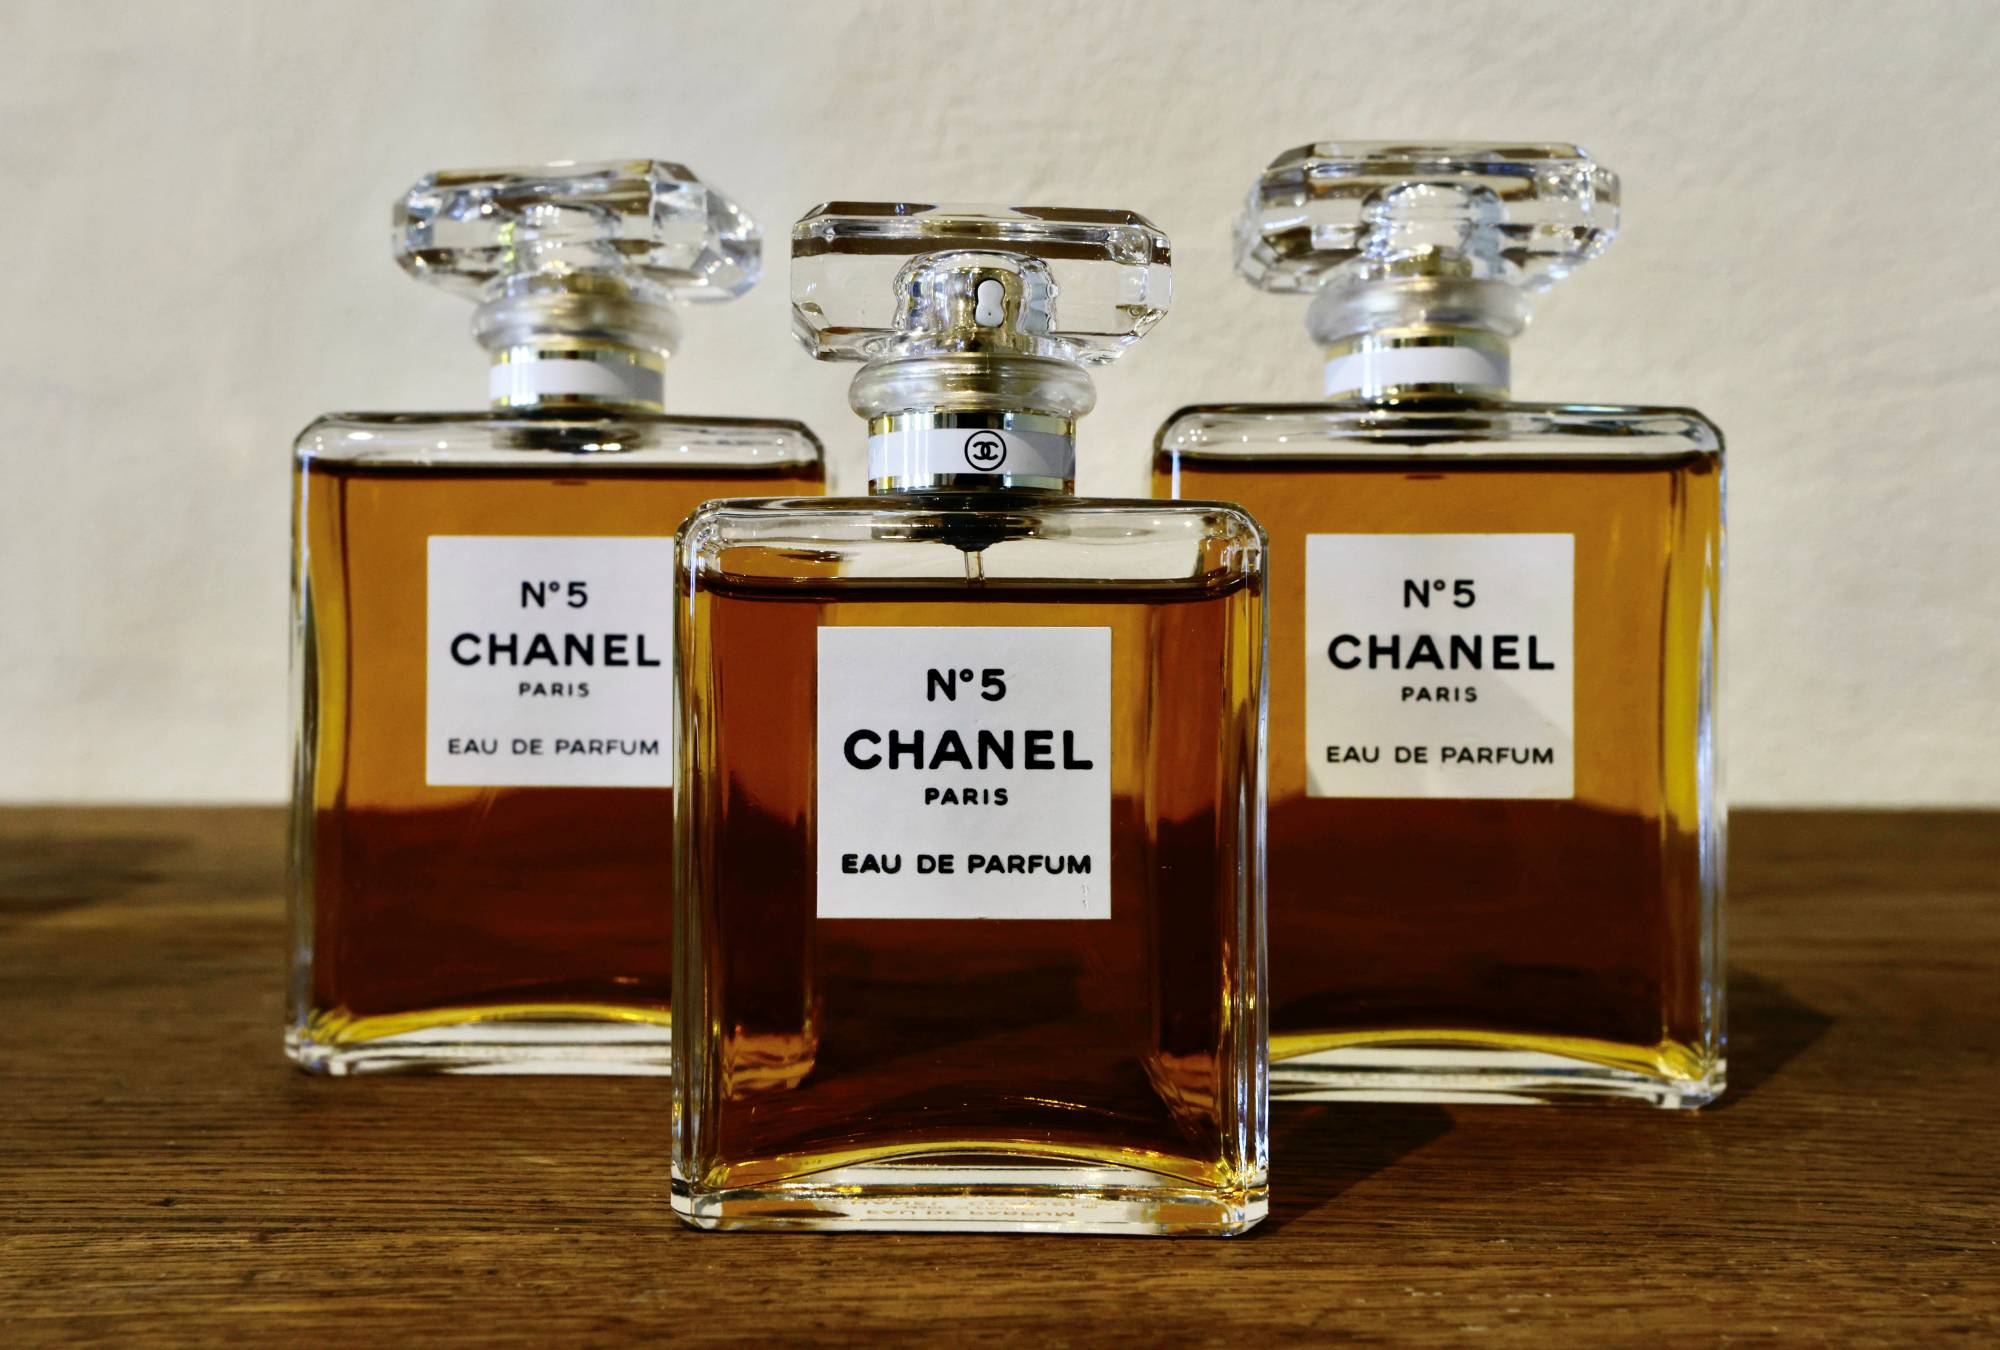 Leading perfume brands like Chanel and Dior have largely ditched the scantily clad models that used to highlight marketing campaigns of the past. | REUTERS